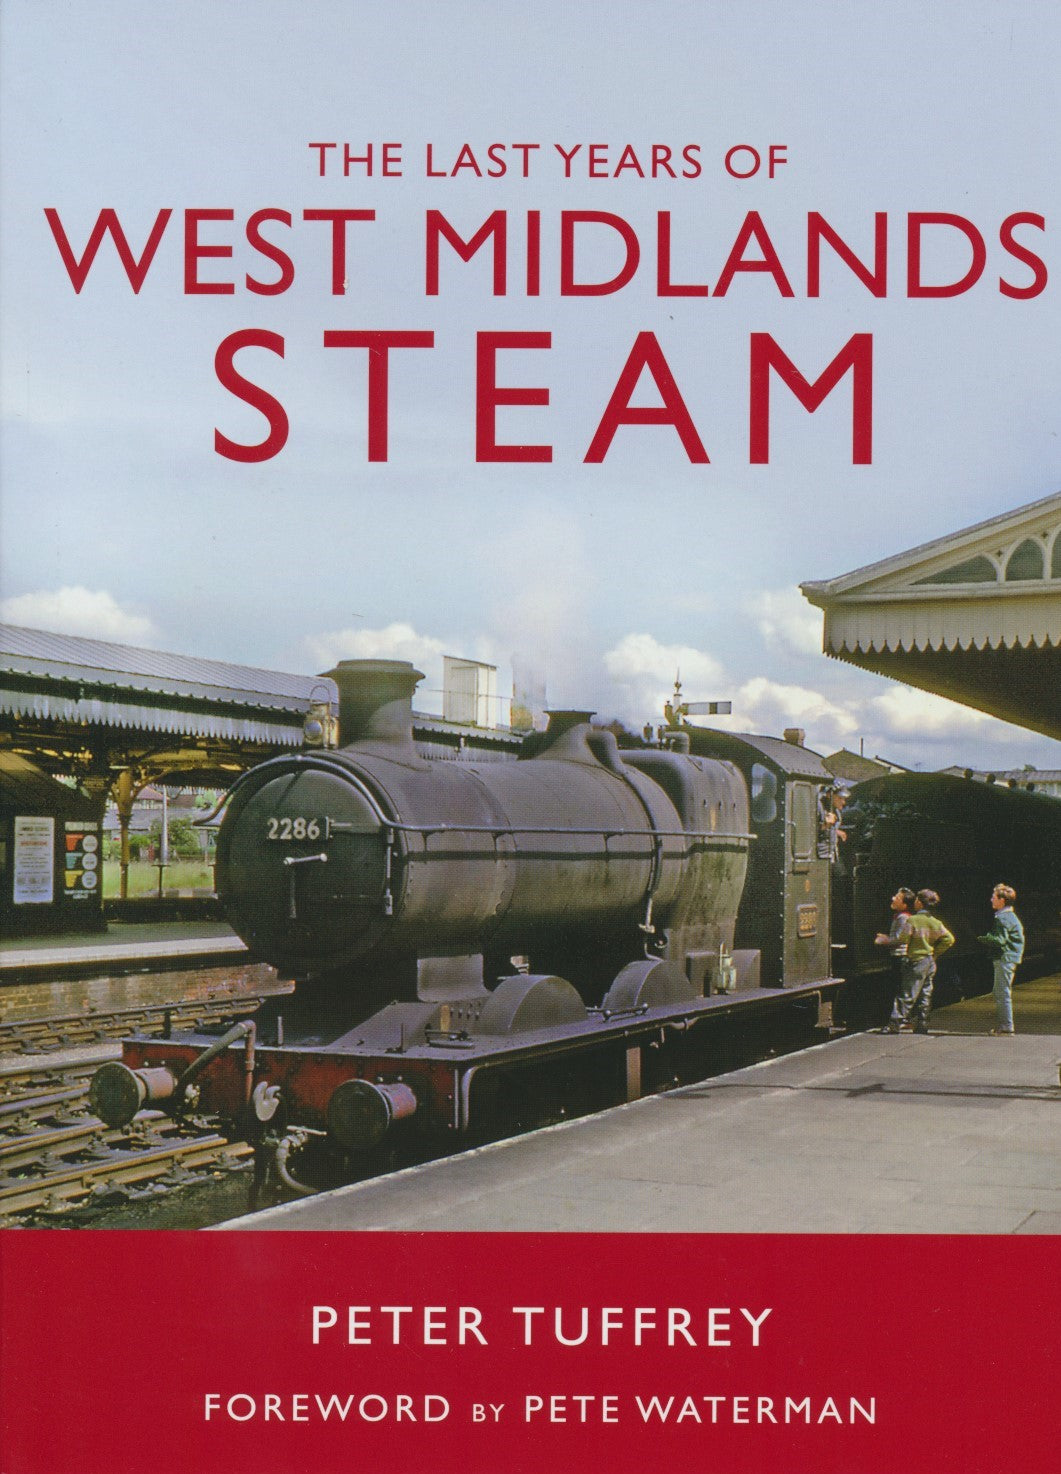 The Last Years of West Midlands Steam